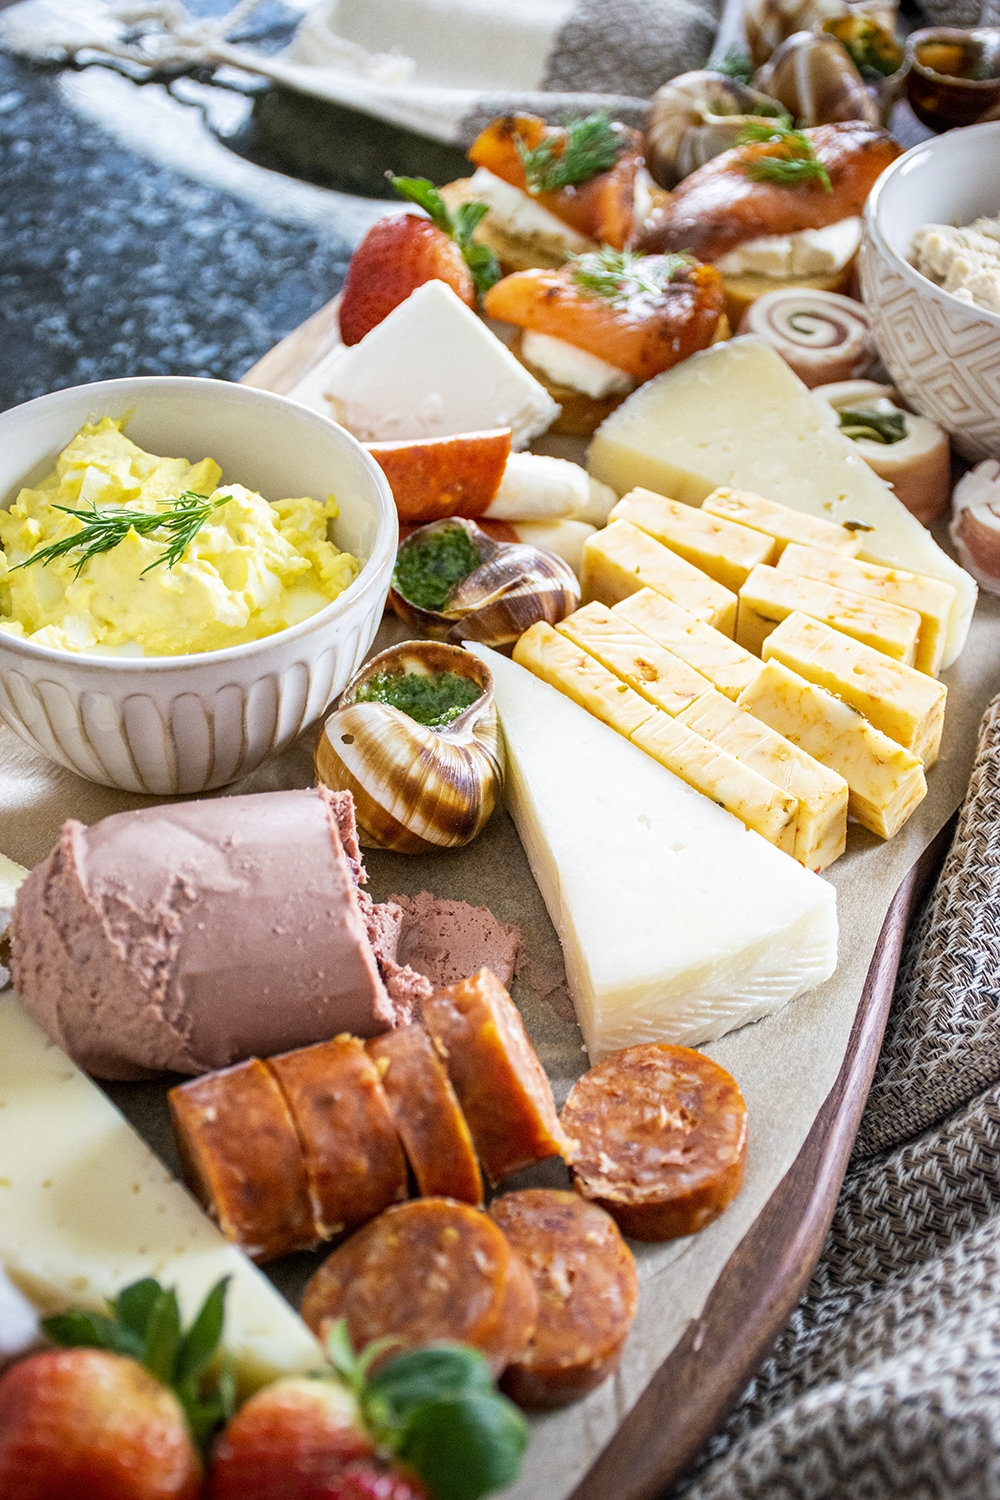 cheese and meat board